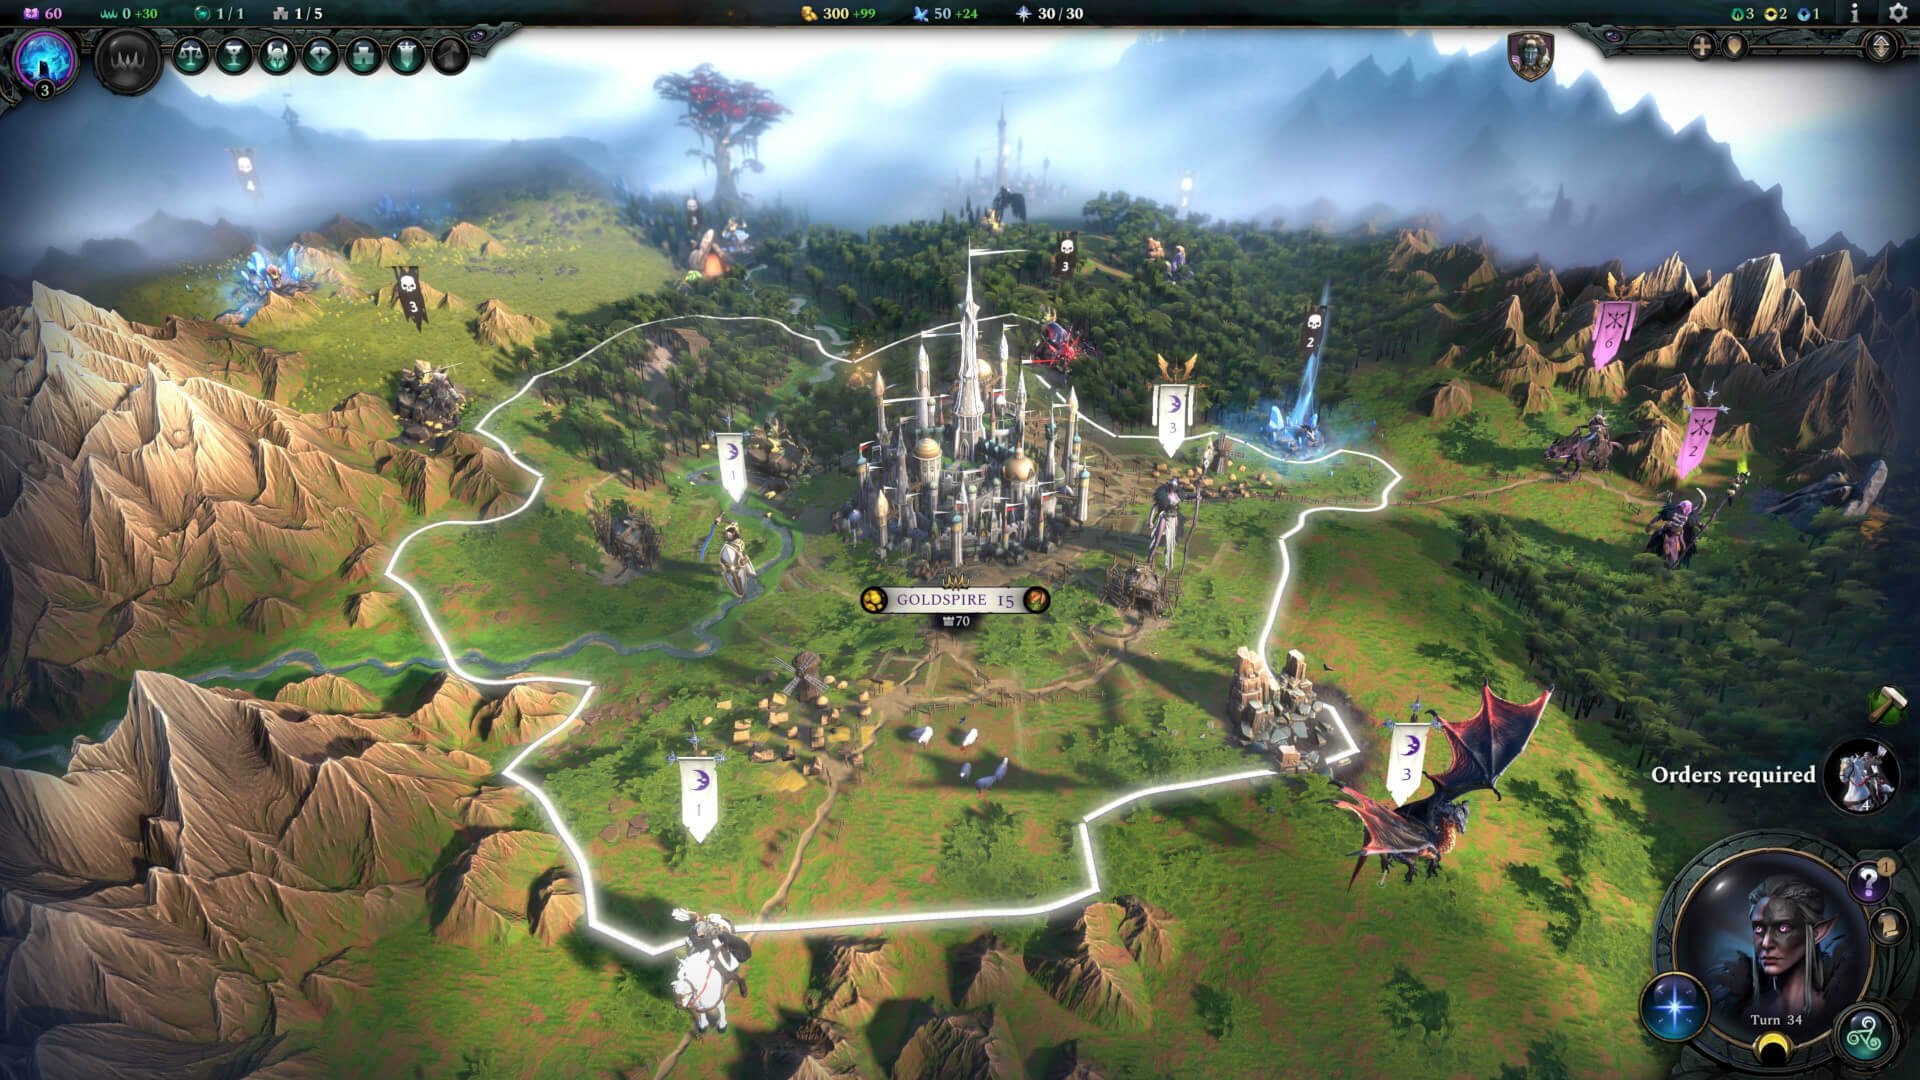 A strategic view of the map screen in Age of Wonders 4